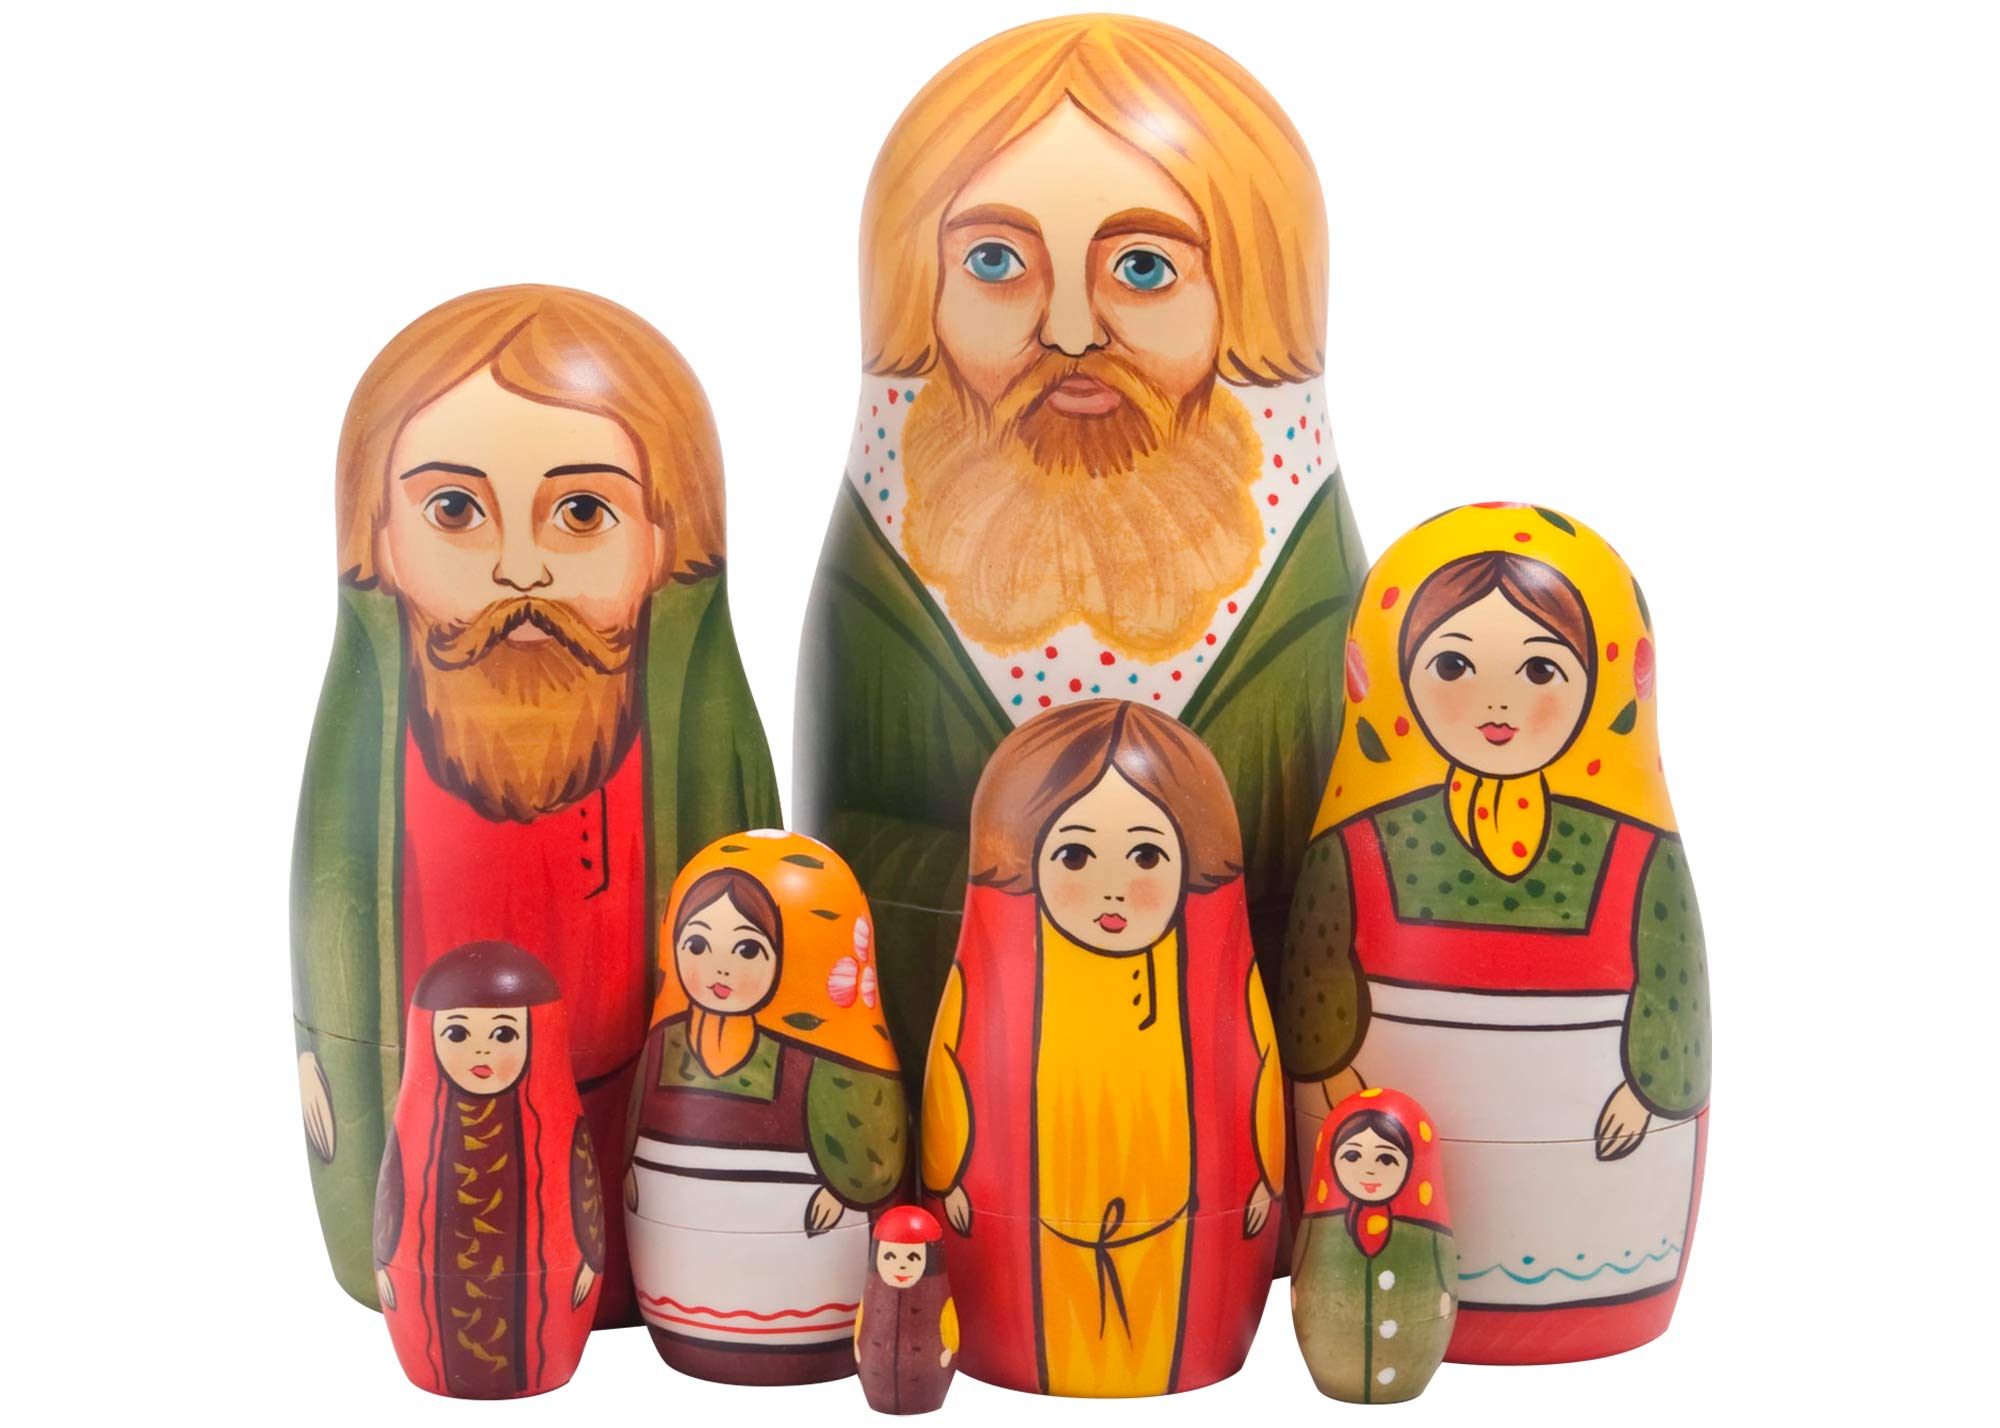 Old Peasant Partiarch Nesting Doll.